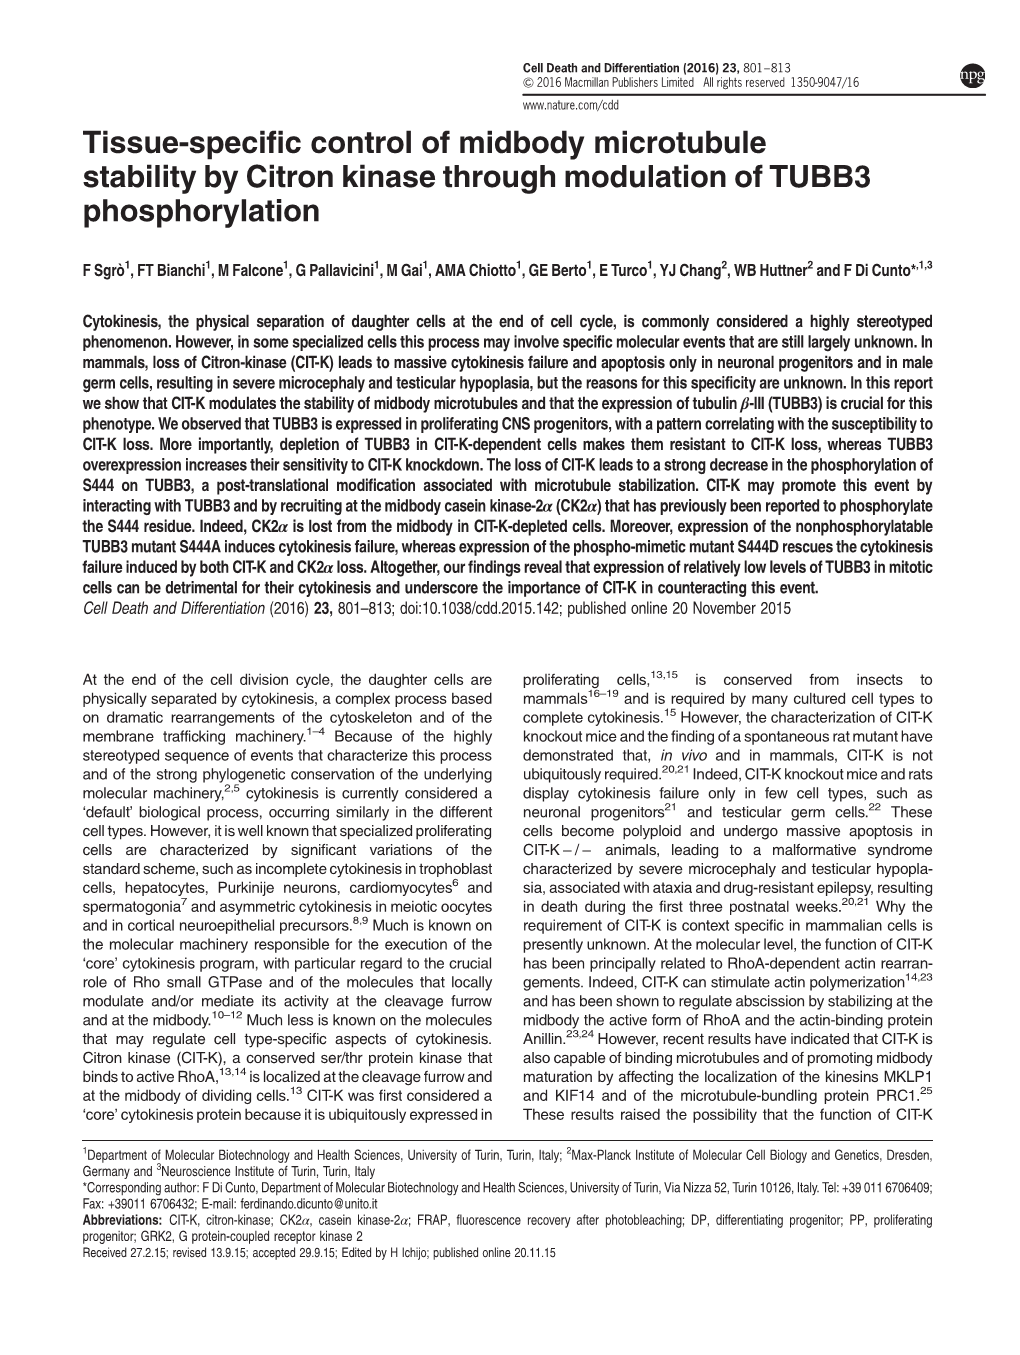 Tissue-Specific Control of Midbody Microtubule Stability by Citron Kinase Through Modulation of TUBB3 Phosphorylation